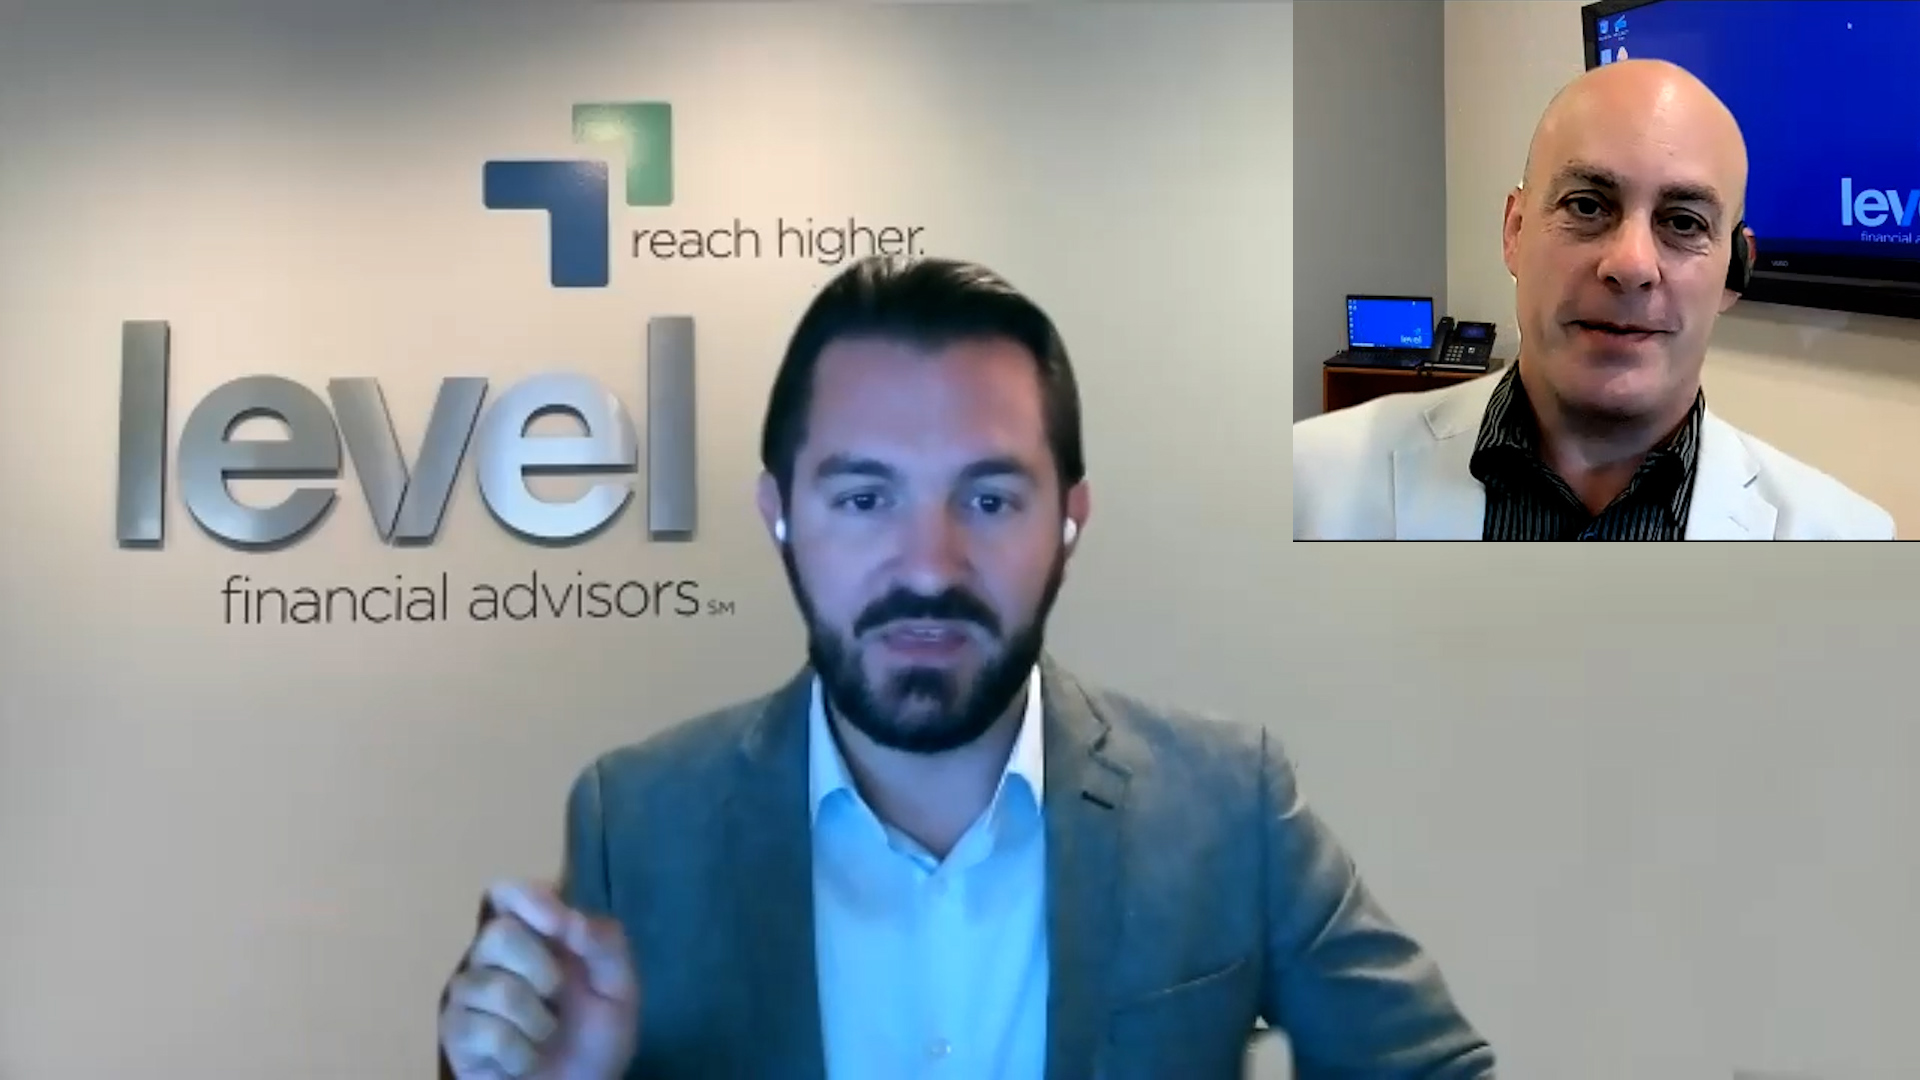 Level Financial Advisors discusses the latest Biden tax proposals in this video